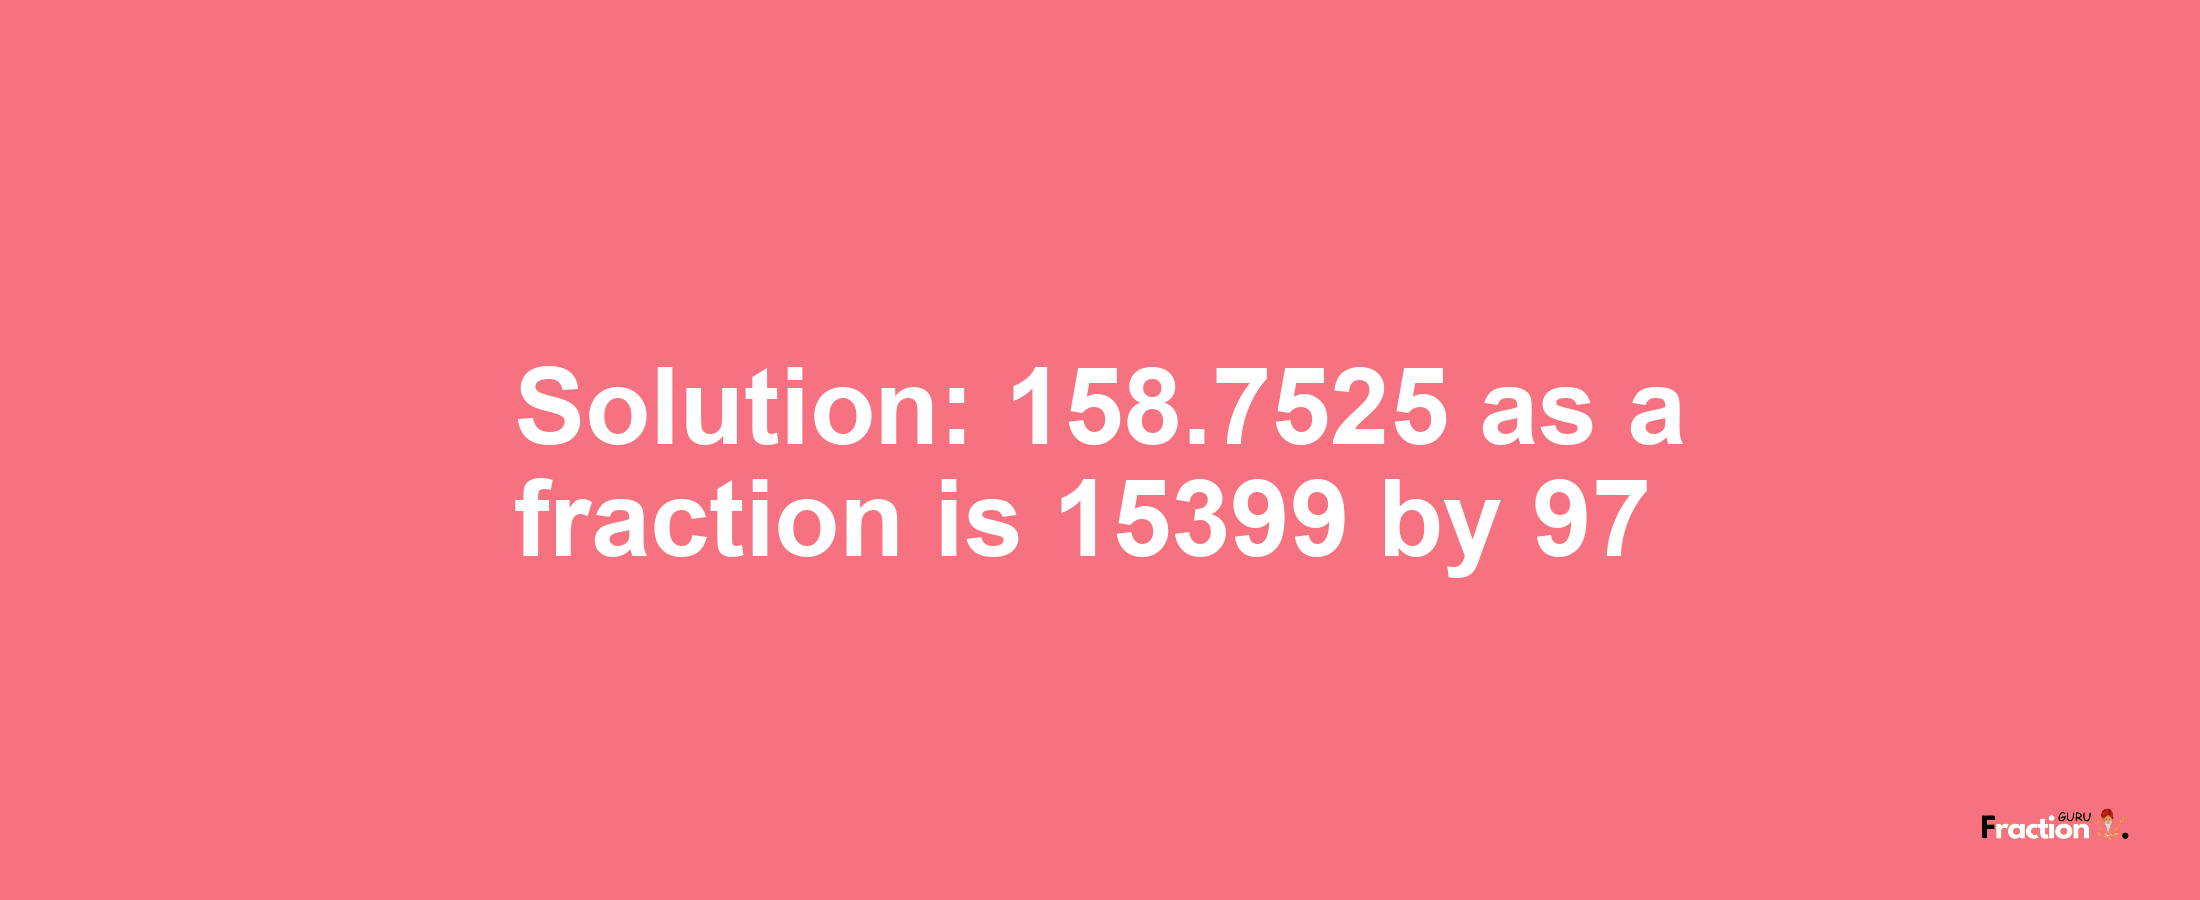 Solution:158.7525 as a fraction is 15399/97